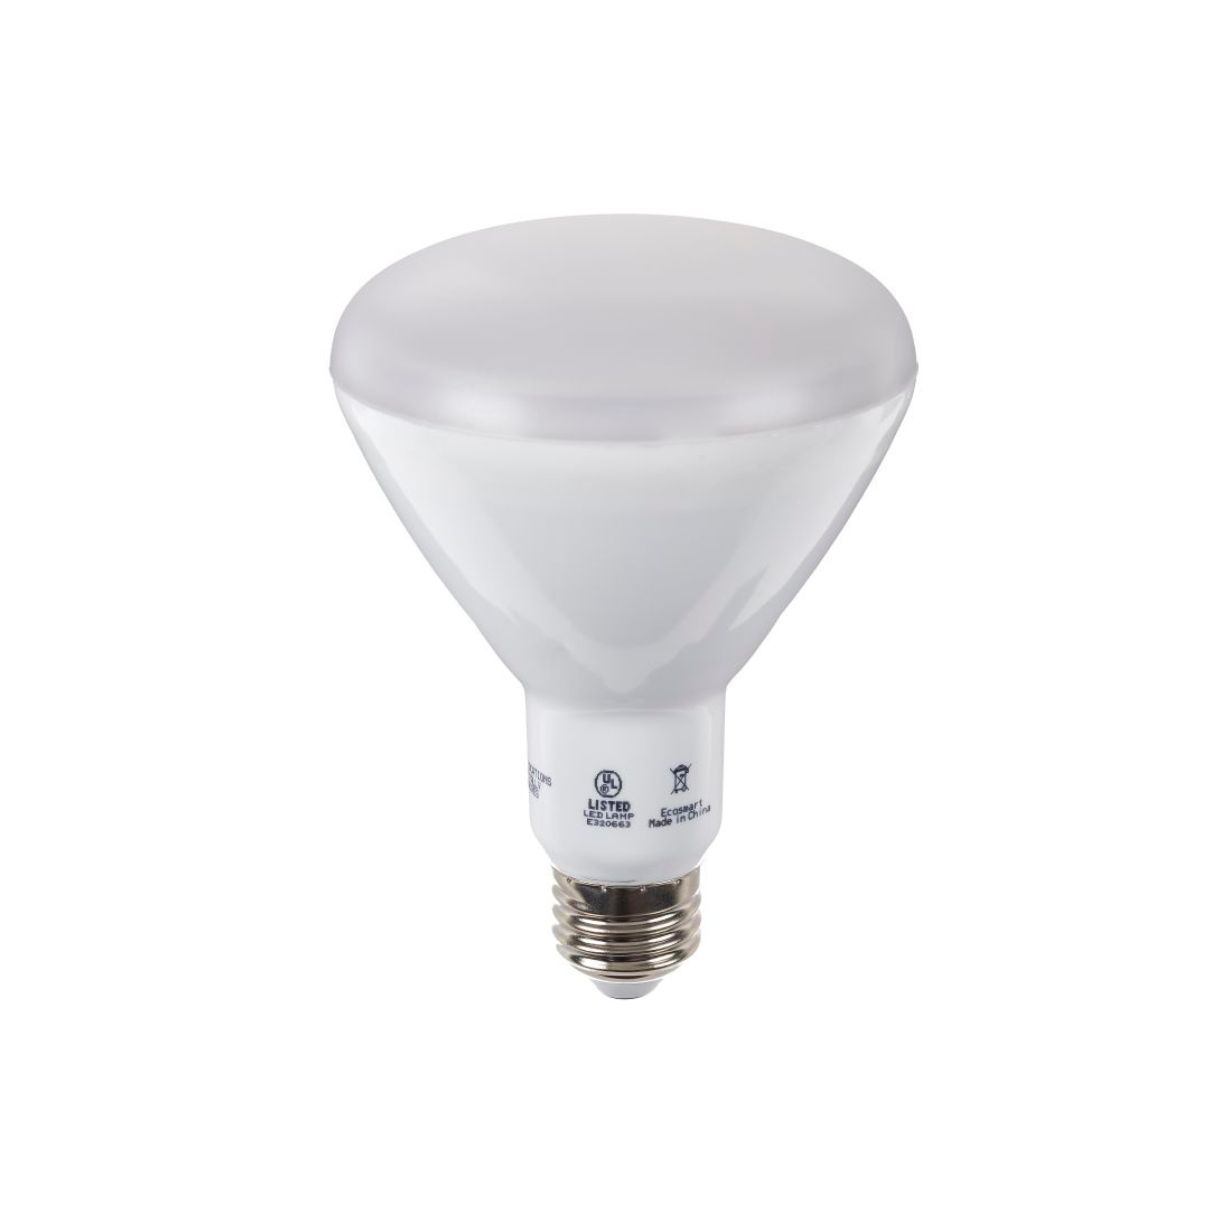 What Is A BR30 Light Bulb?